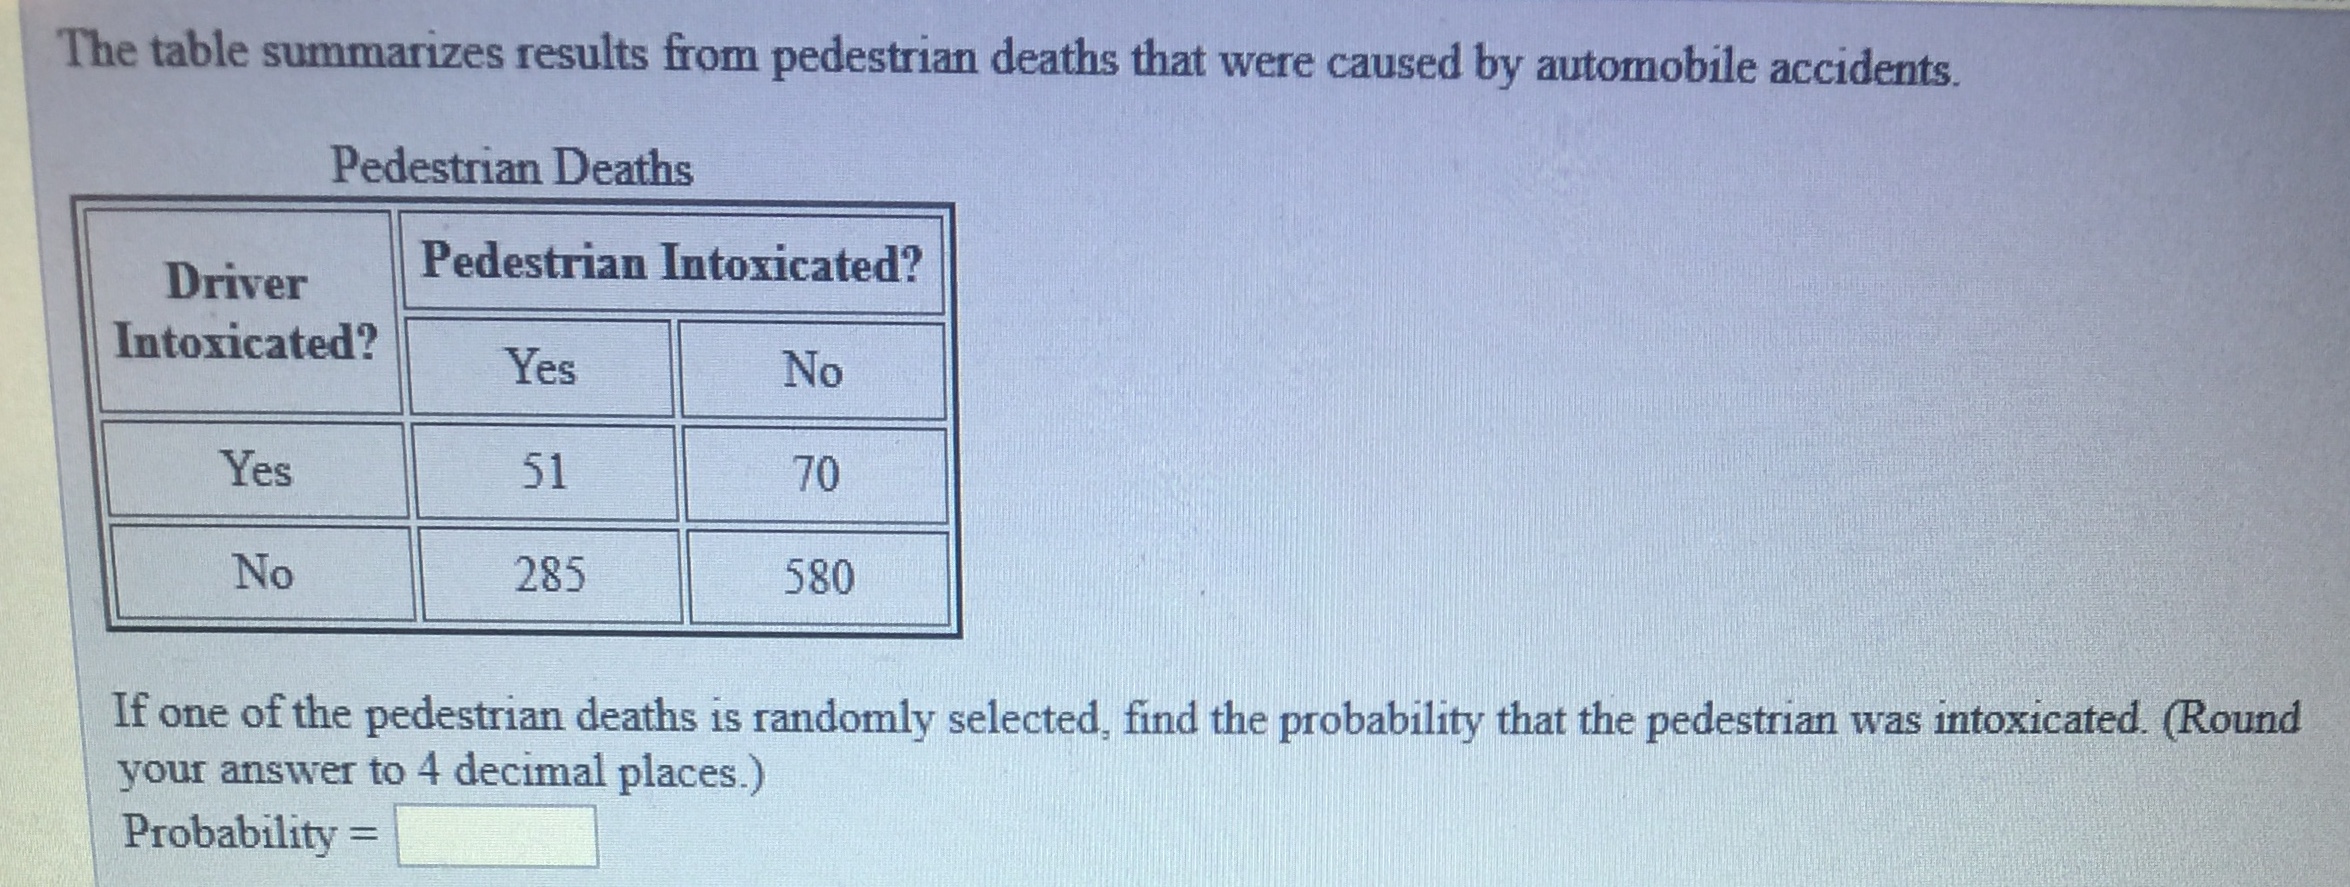 The table summarizes results from pedestrian deaths that were caused by automobile accidents.
Pedestrian Deaths
Driver Pedestrian Intoxicated?
Intoxicated?Yes
No
70
580
Yes
51
No
285
toter
If one of the pedestrian deaths is randomly selected, find the probability that the pedestrian was intoxicated. (Round
your answer to 4 decimal places.)
Probability
